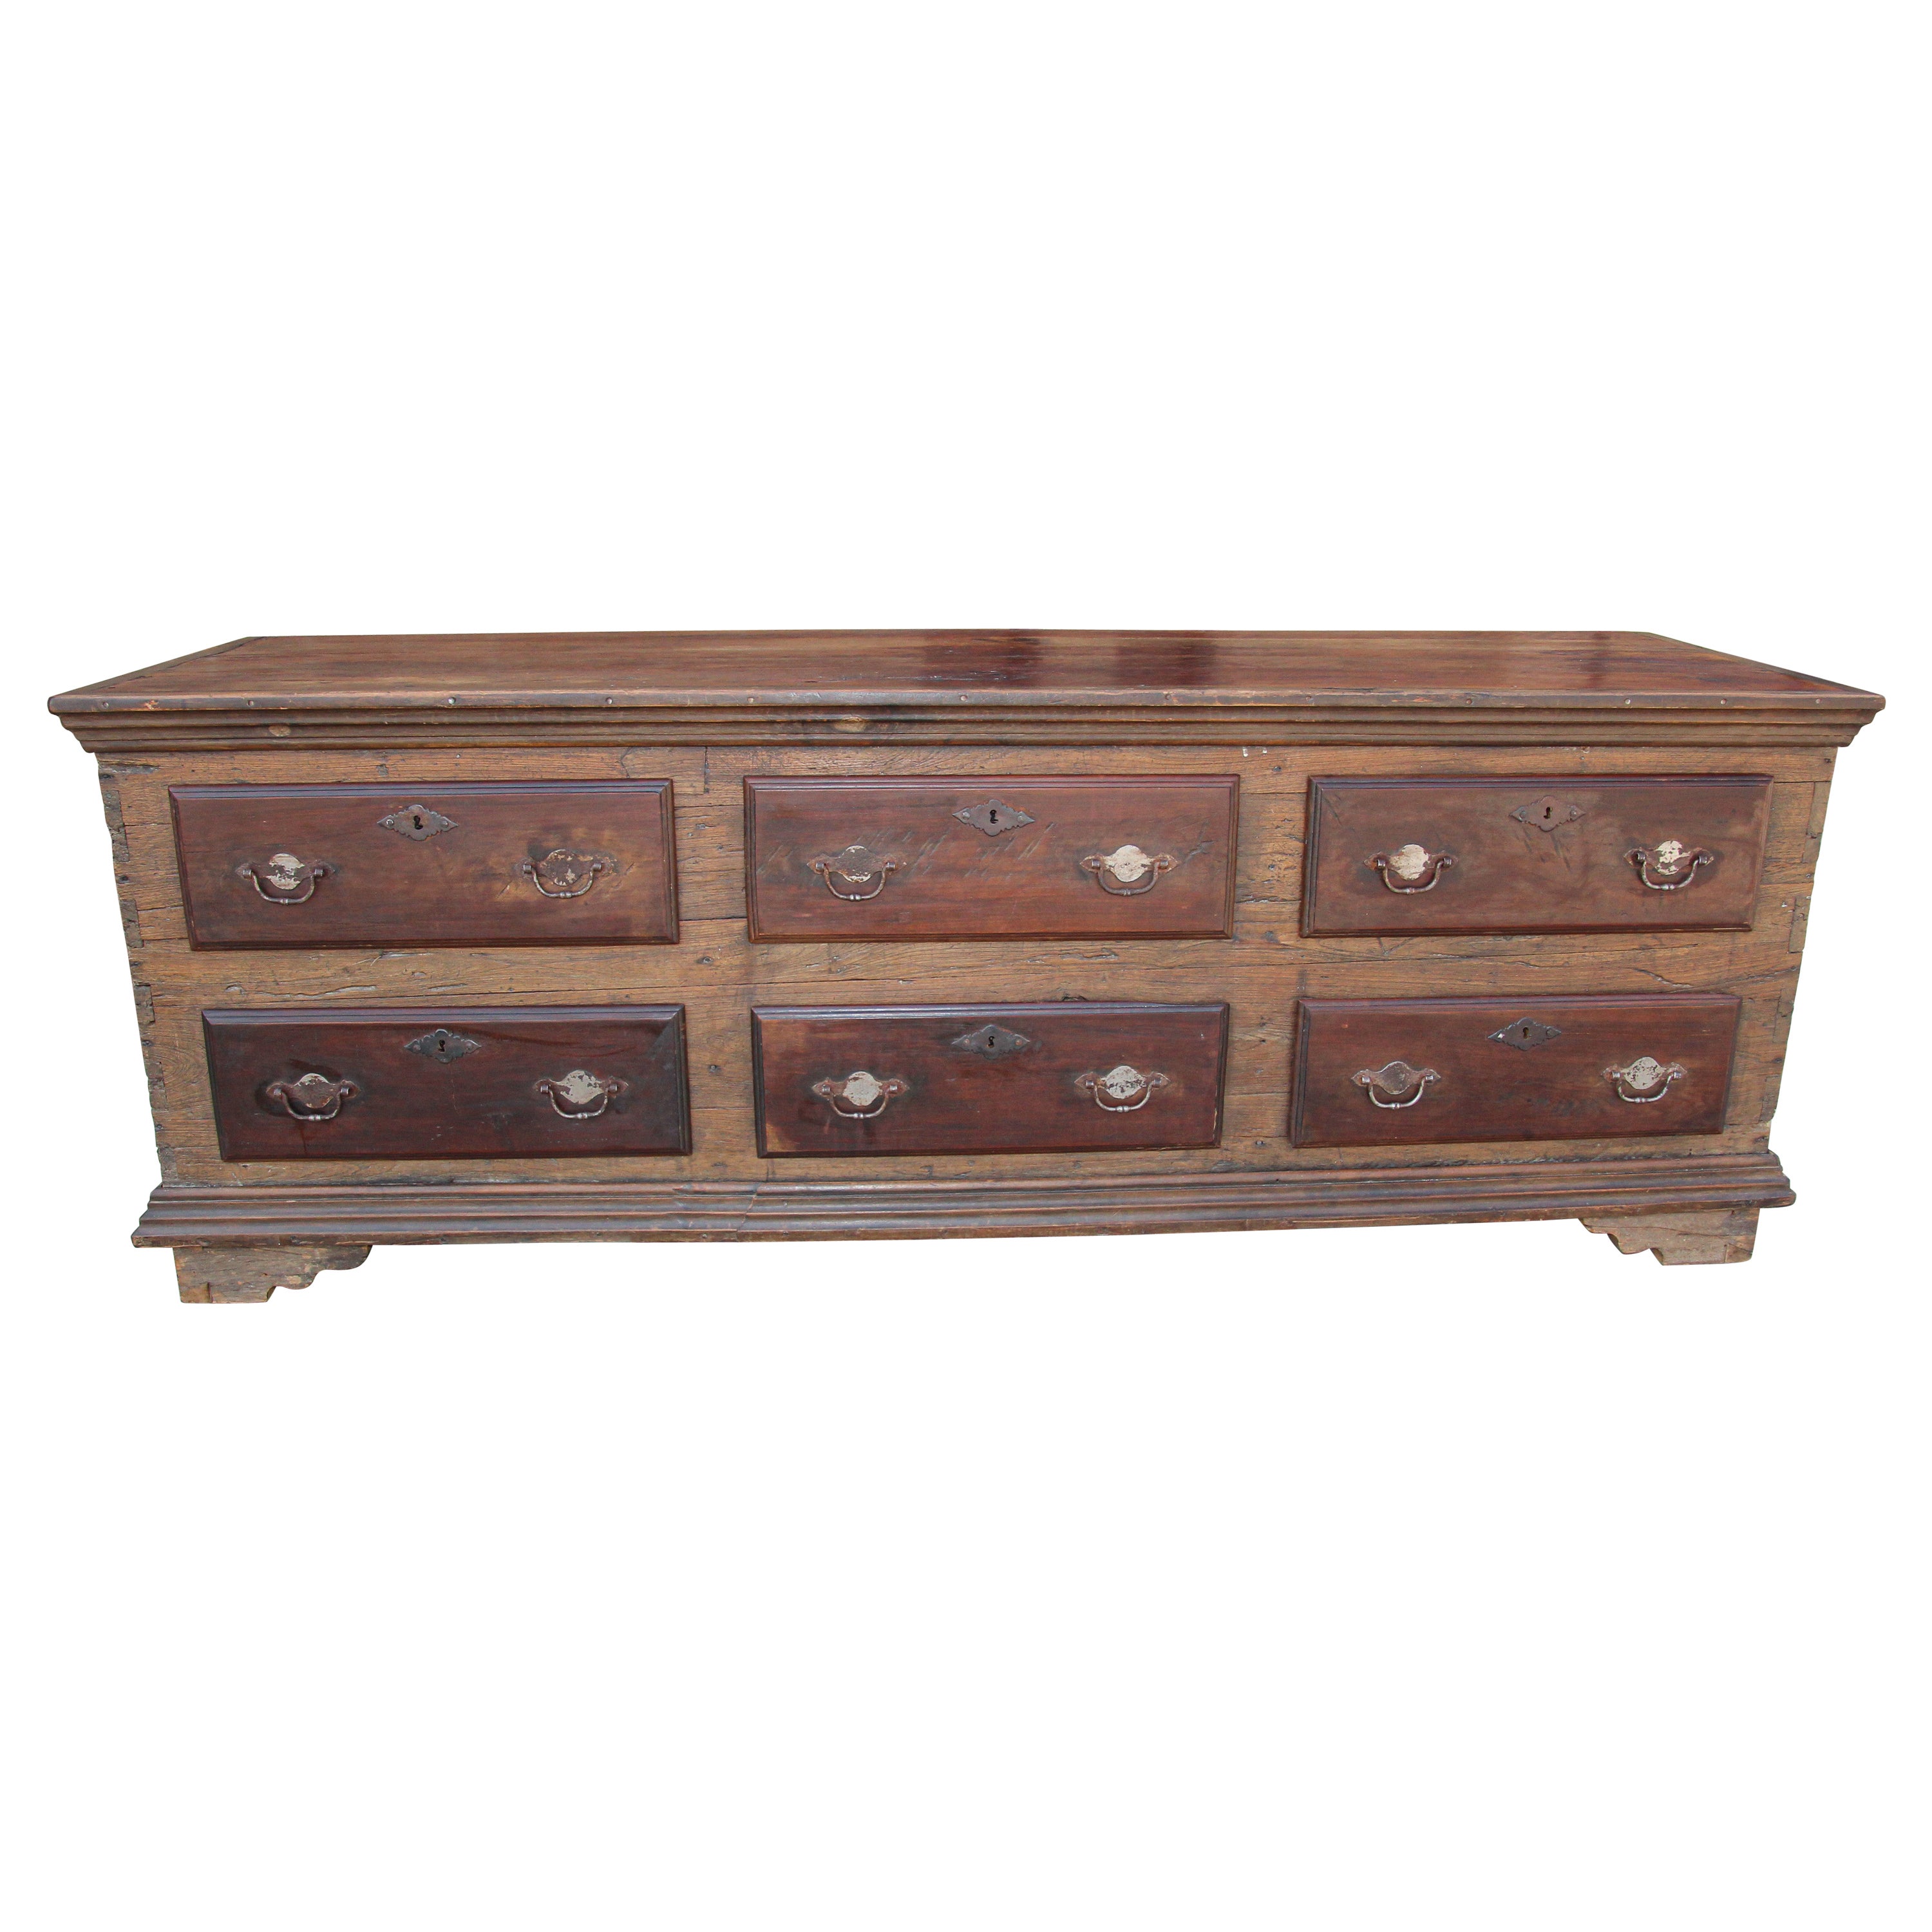 Monumental Antique Solid Rustic Oak Georgian Country Chest, Sideboard